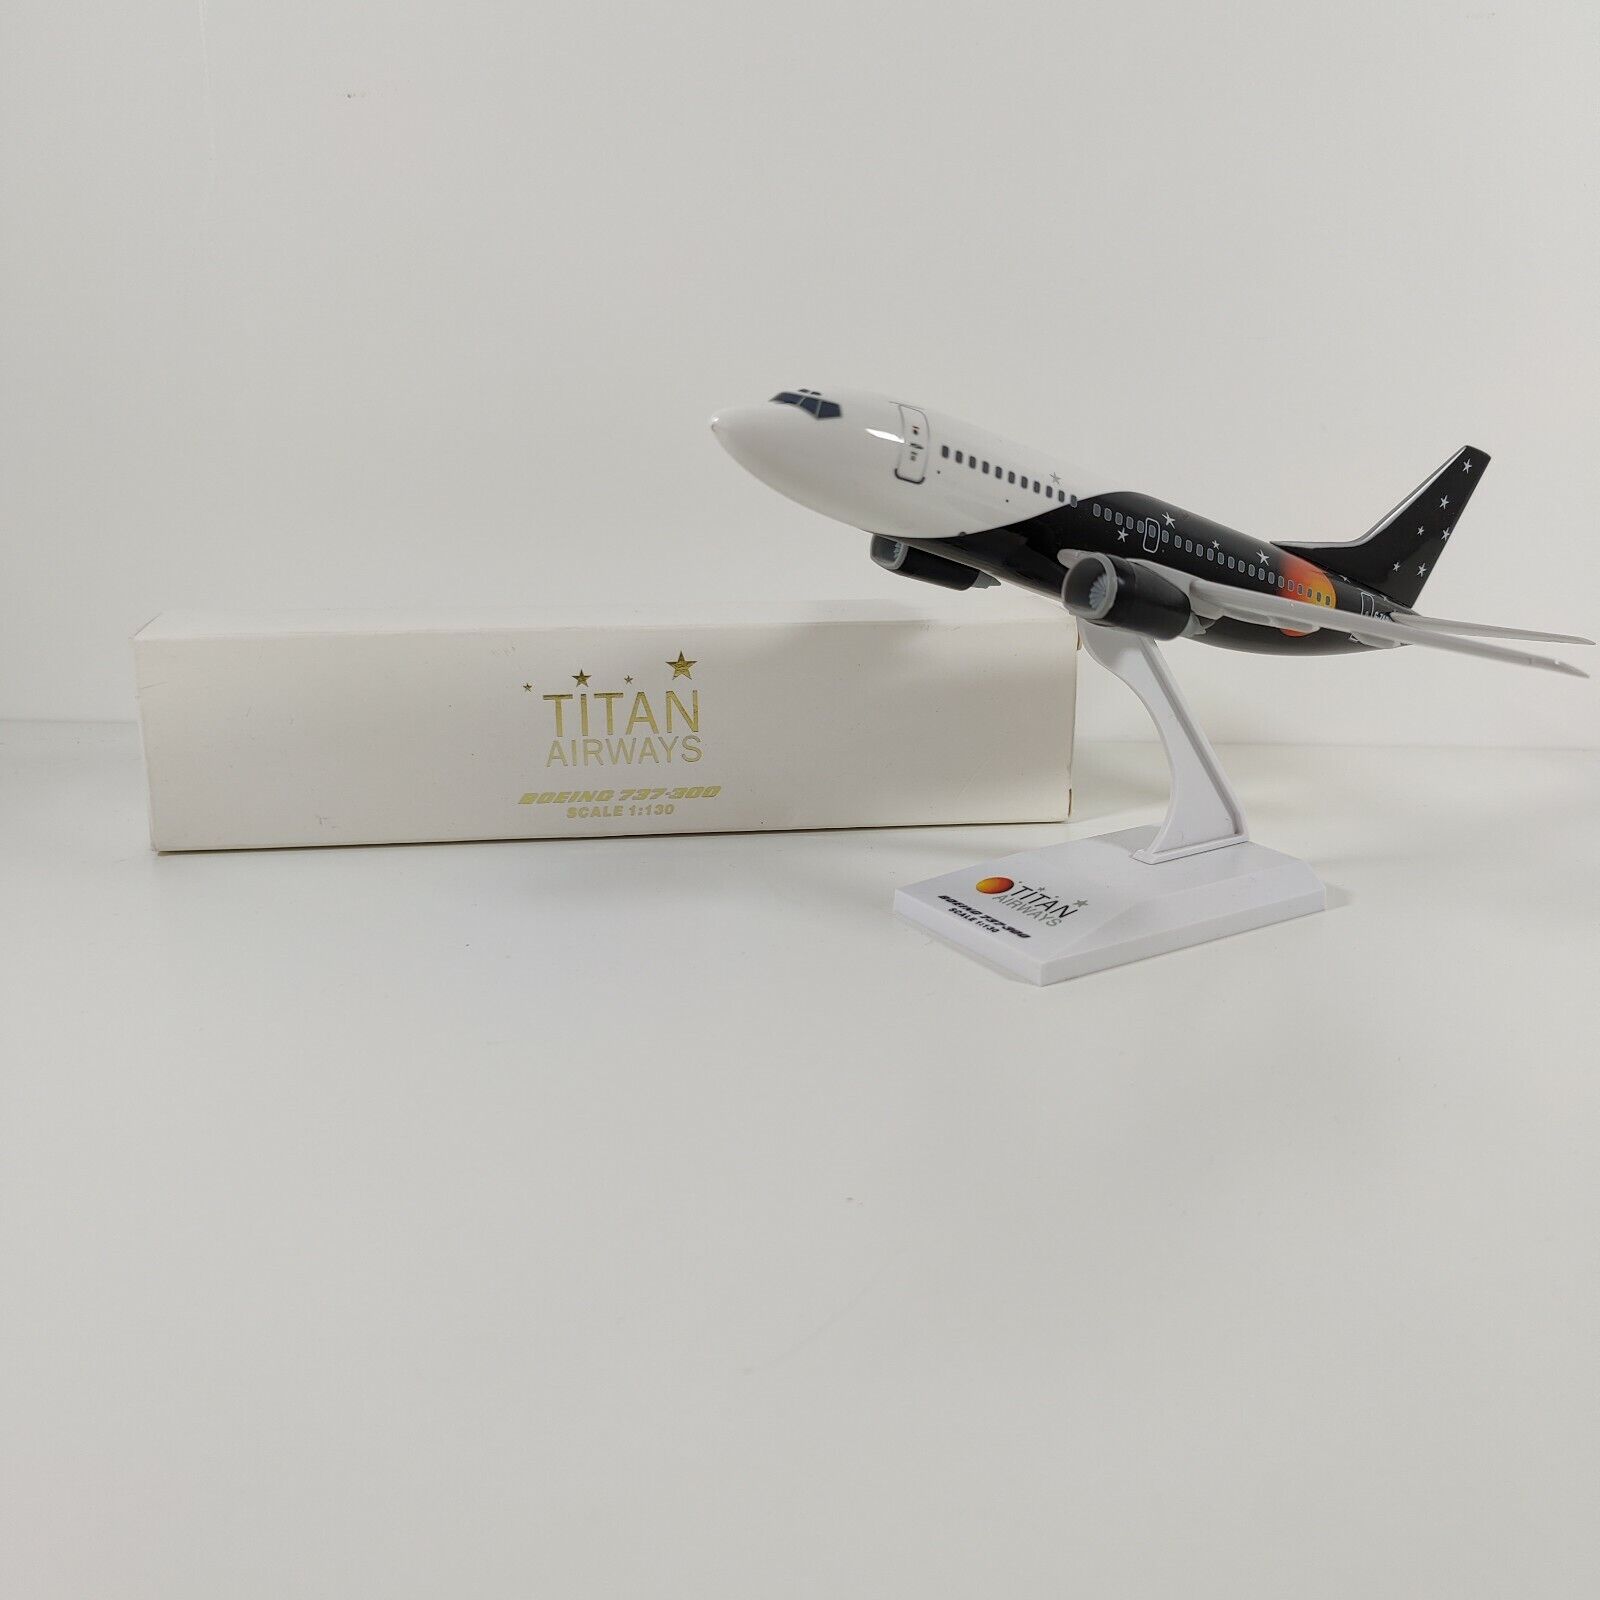 Titan Airways Boeing 737-300 Aircraft 1:130 Scale model RARE boxed.